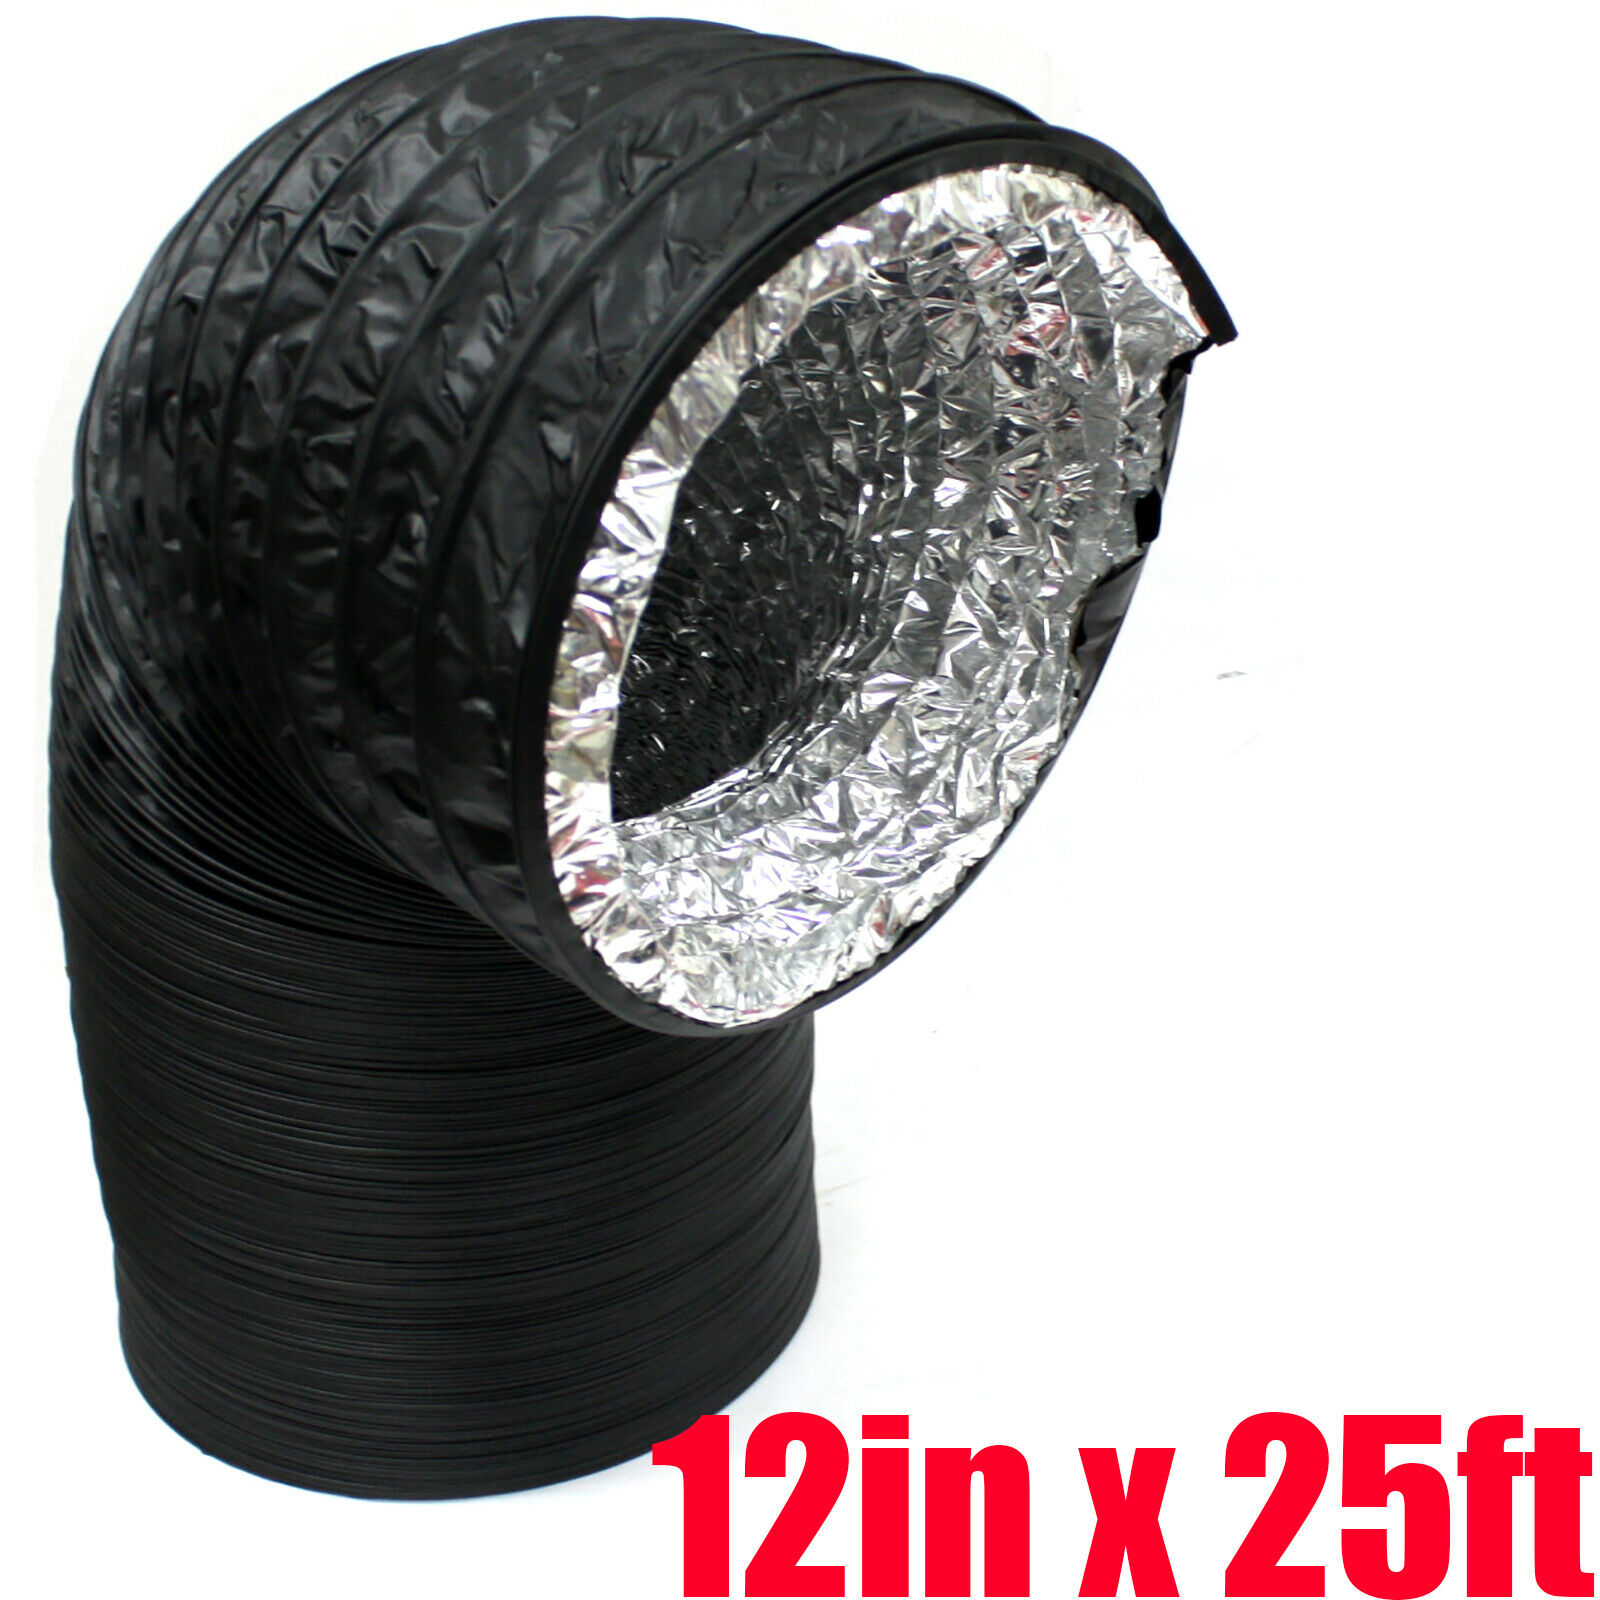 12" Inch Aluminum Air Ducting 25 Ft Long for Ventilation 2 Pcs Worm Gear Clamps 